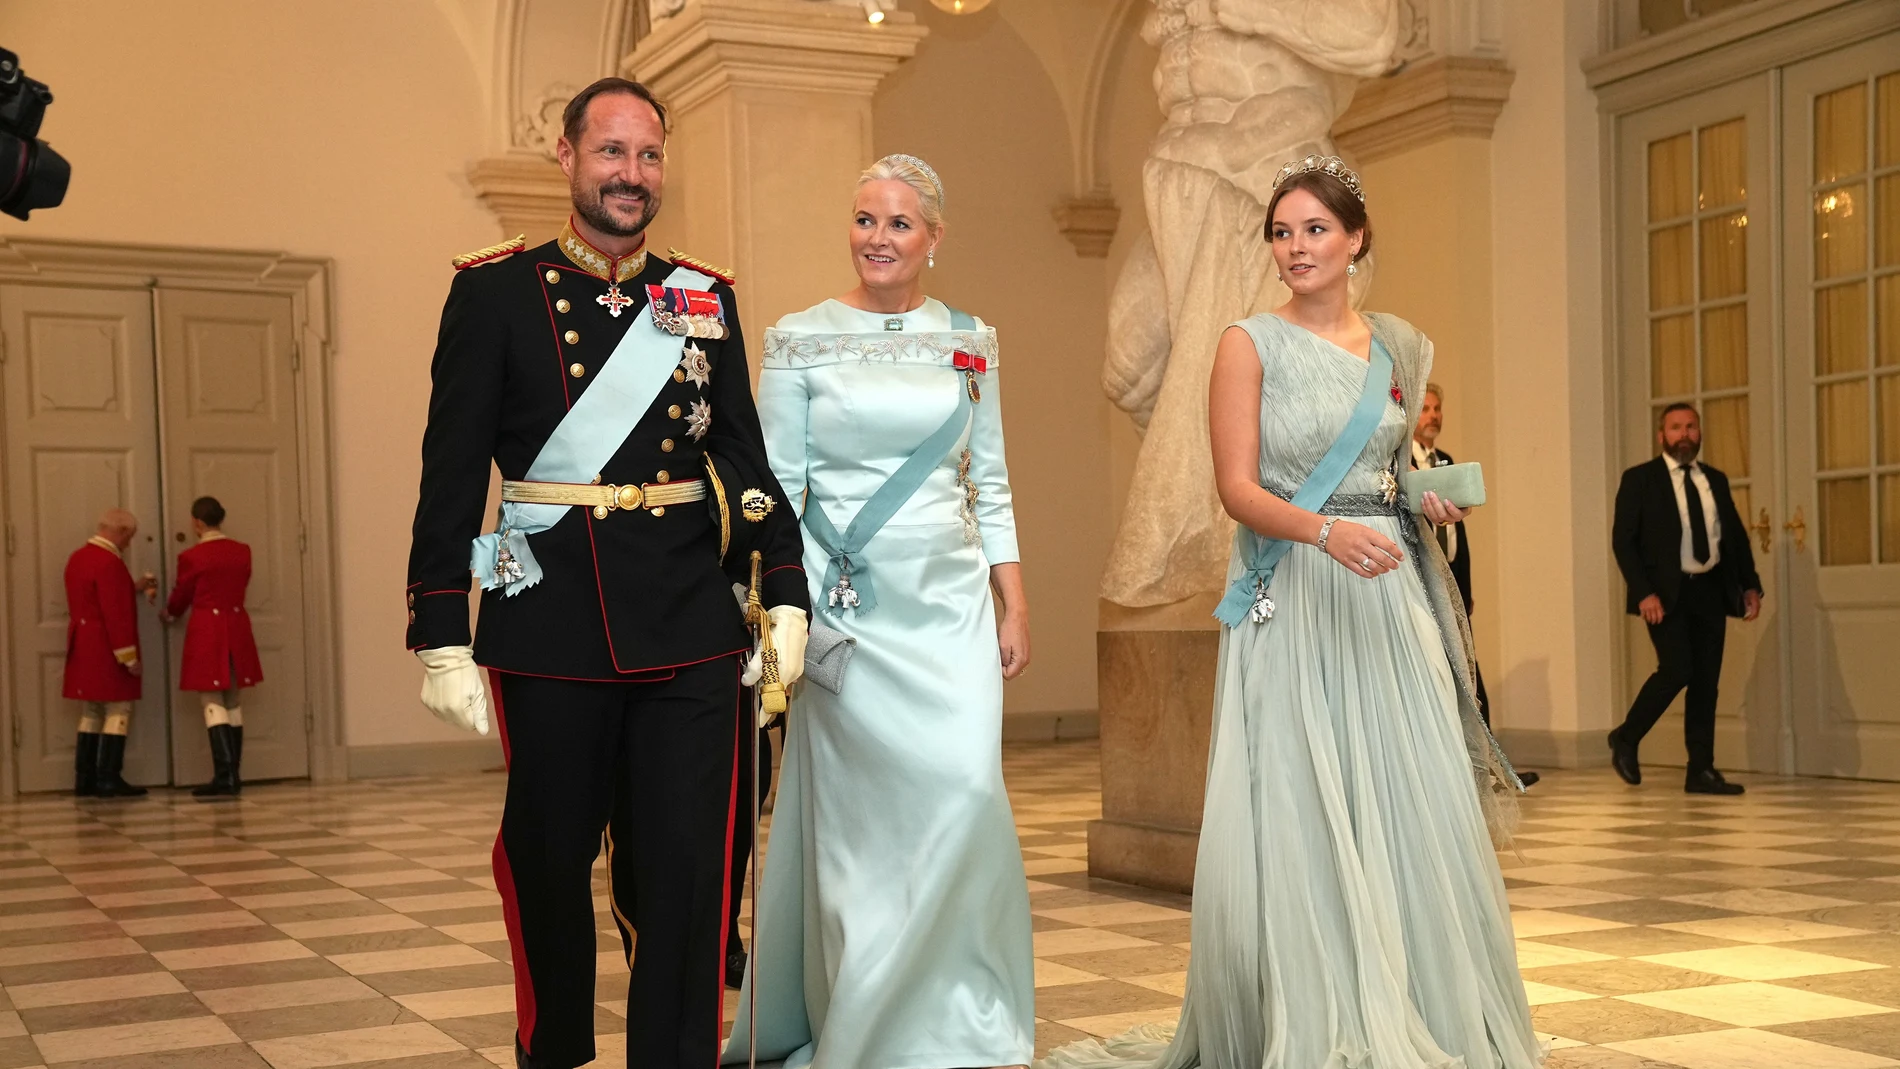  Crown Prince Haakon and Crown Princess Mette-Marit of Norway with their daughter Princess Ingrid Alexandra arrive for a gala dinner on the occasion of Prince Christian's of Denmark 18th birthday, at Christiansborg Castle in Copenhagen, Denmark